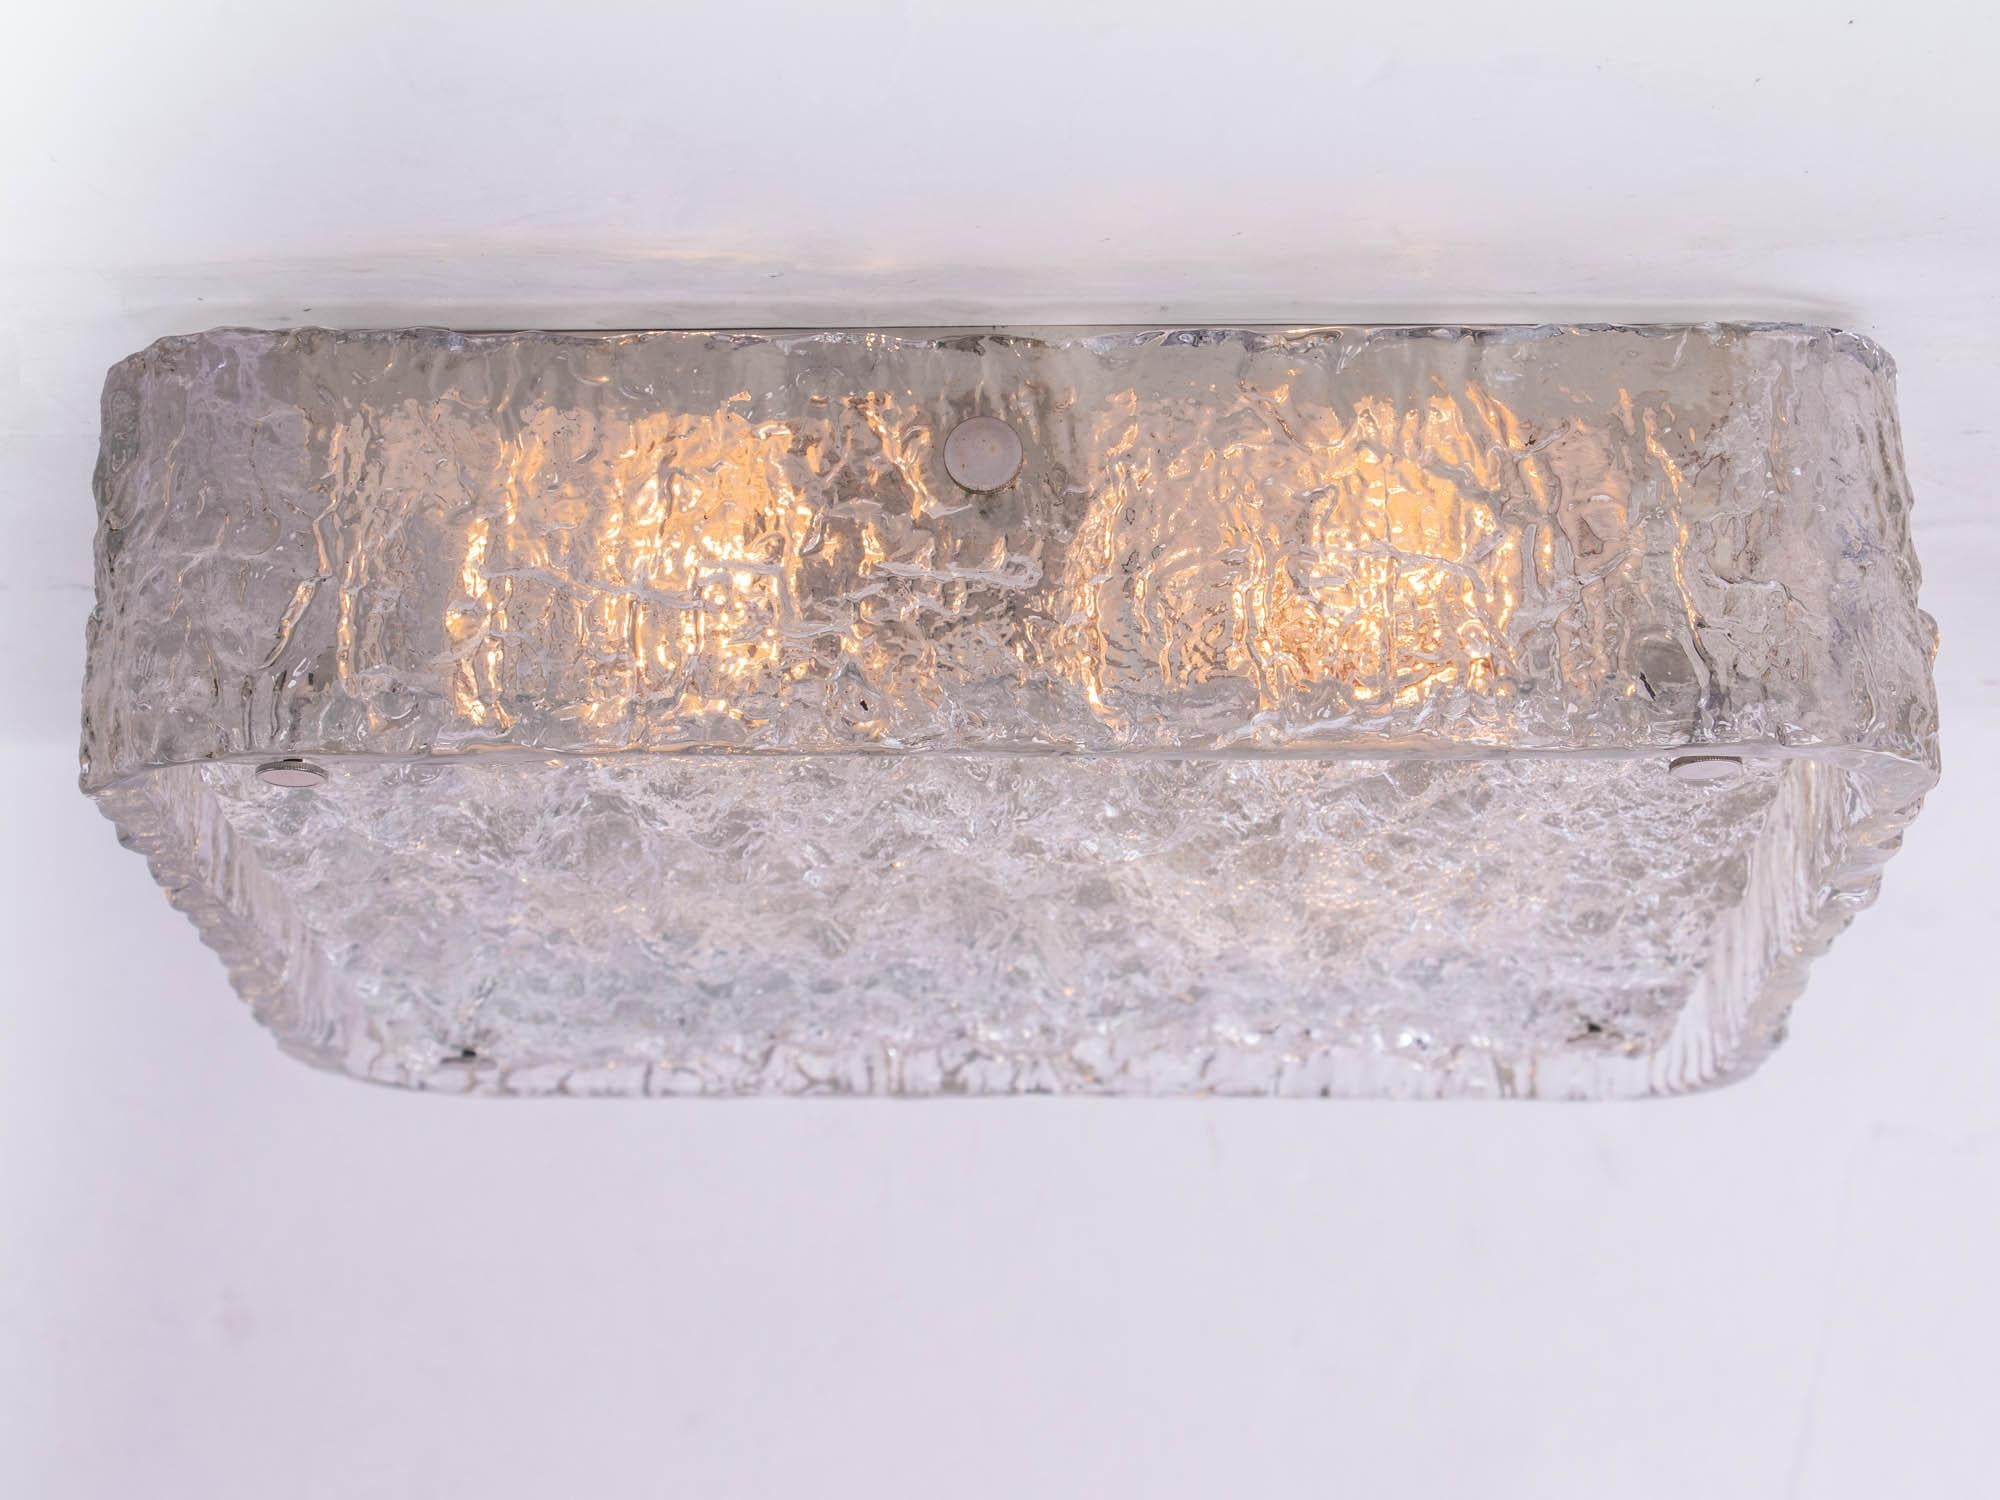 Elegant large two part rectangular-shaped flush mount ceiling light with one ring outside and a flat disc made of heavy textured clear iced glass on a white laquered metal frame with chromed nickel finals. Manufactured by Kaiser Lighting, Germany in